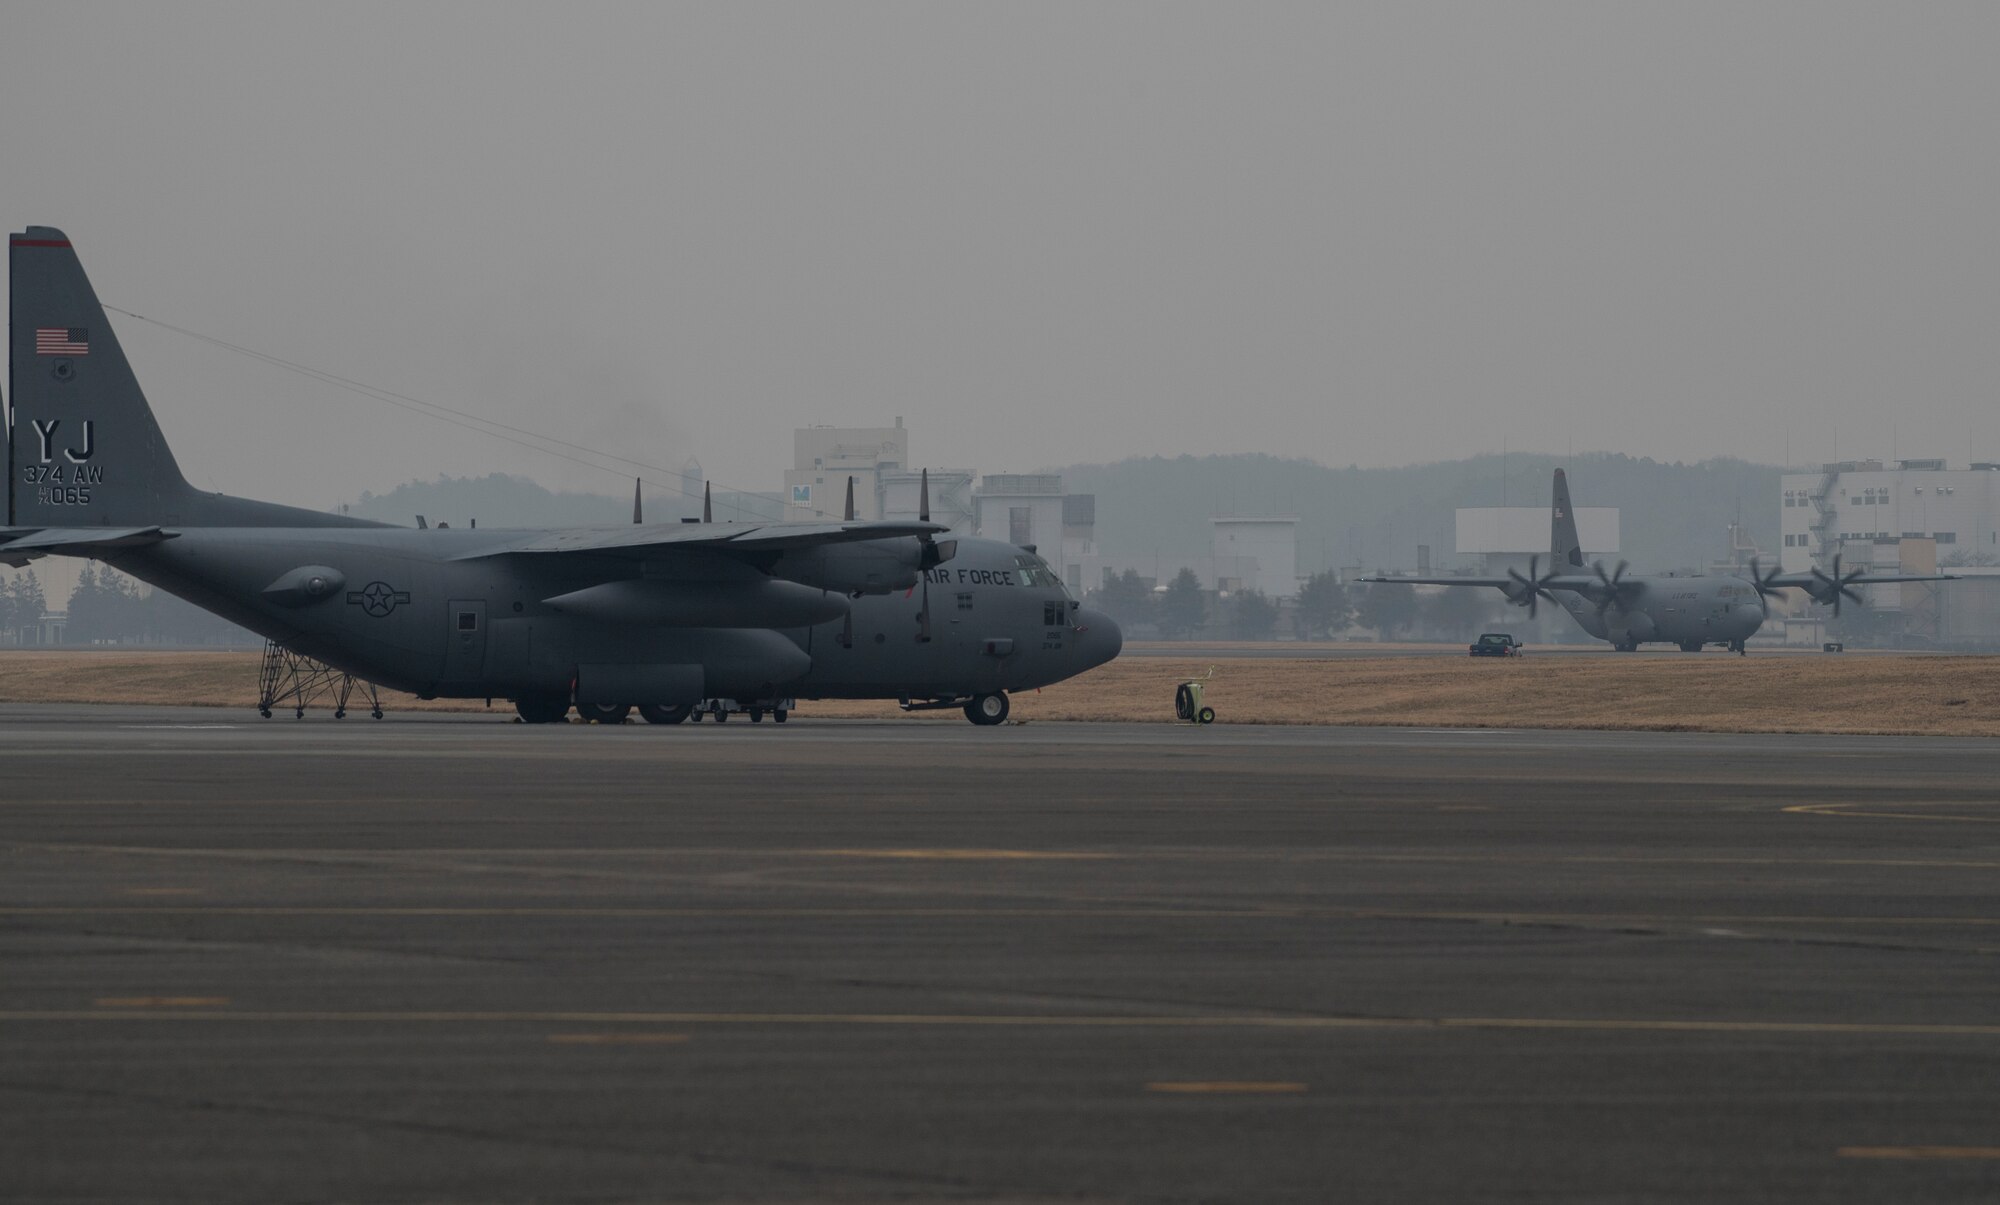 A C-130J Super Hercules with the 36th Airlift Squadron, right, taxis down the runway at Yokota Air Base, Japan, March 6, 2016. The new aircraft will eventually replace the unit’s existing C-130H fleet, which has been in service for nearly 30 years. (U.S. Air Force photo by Staff Sgt. David Owsianka)